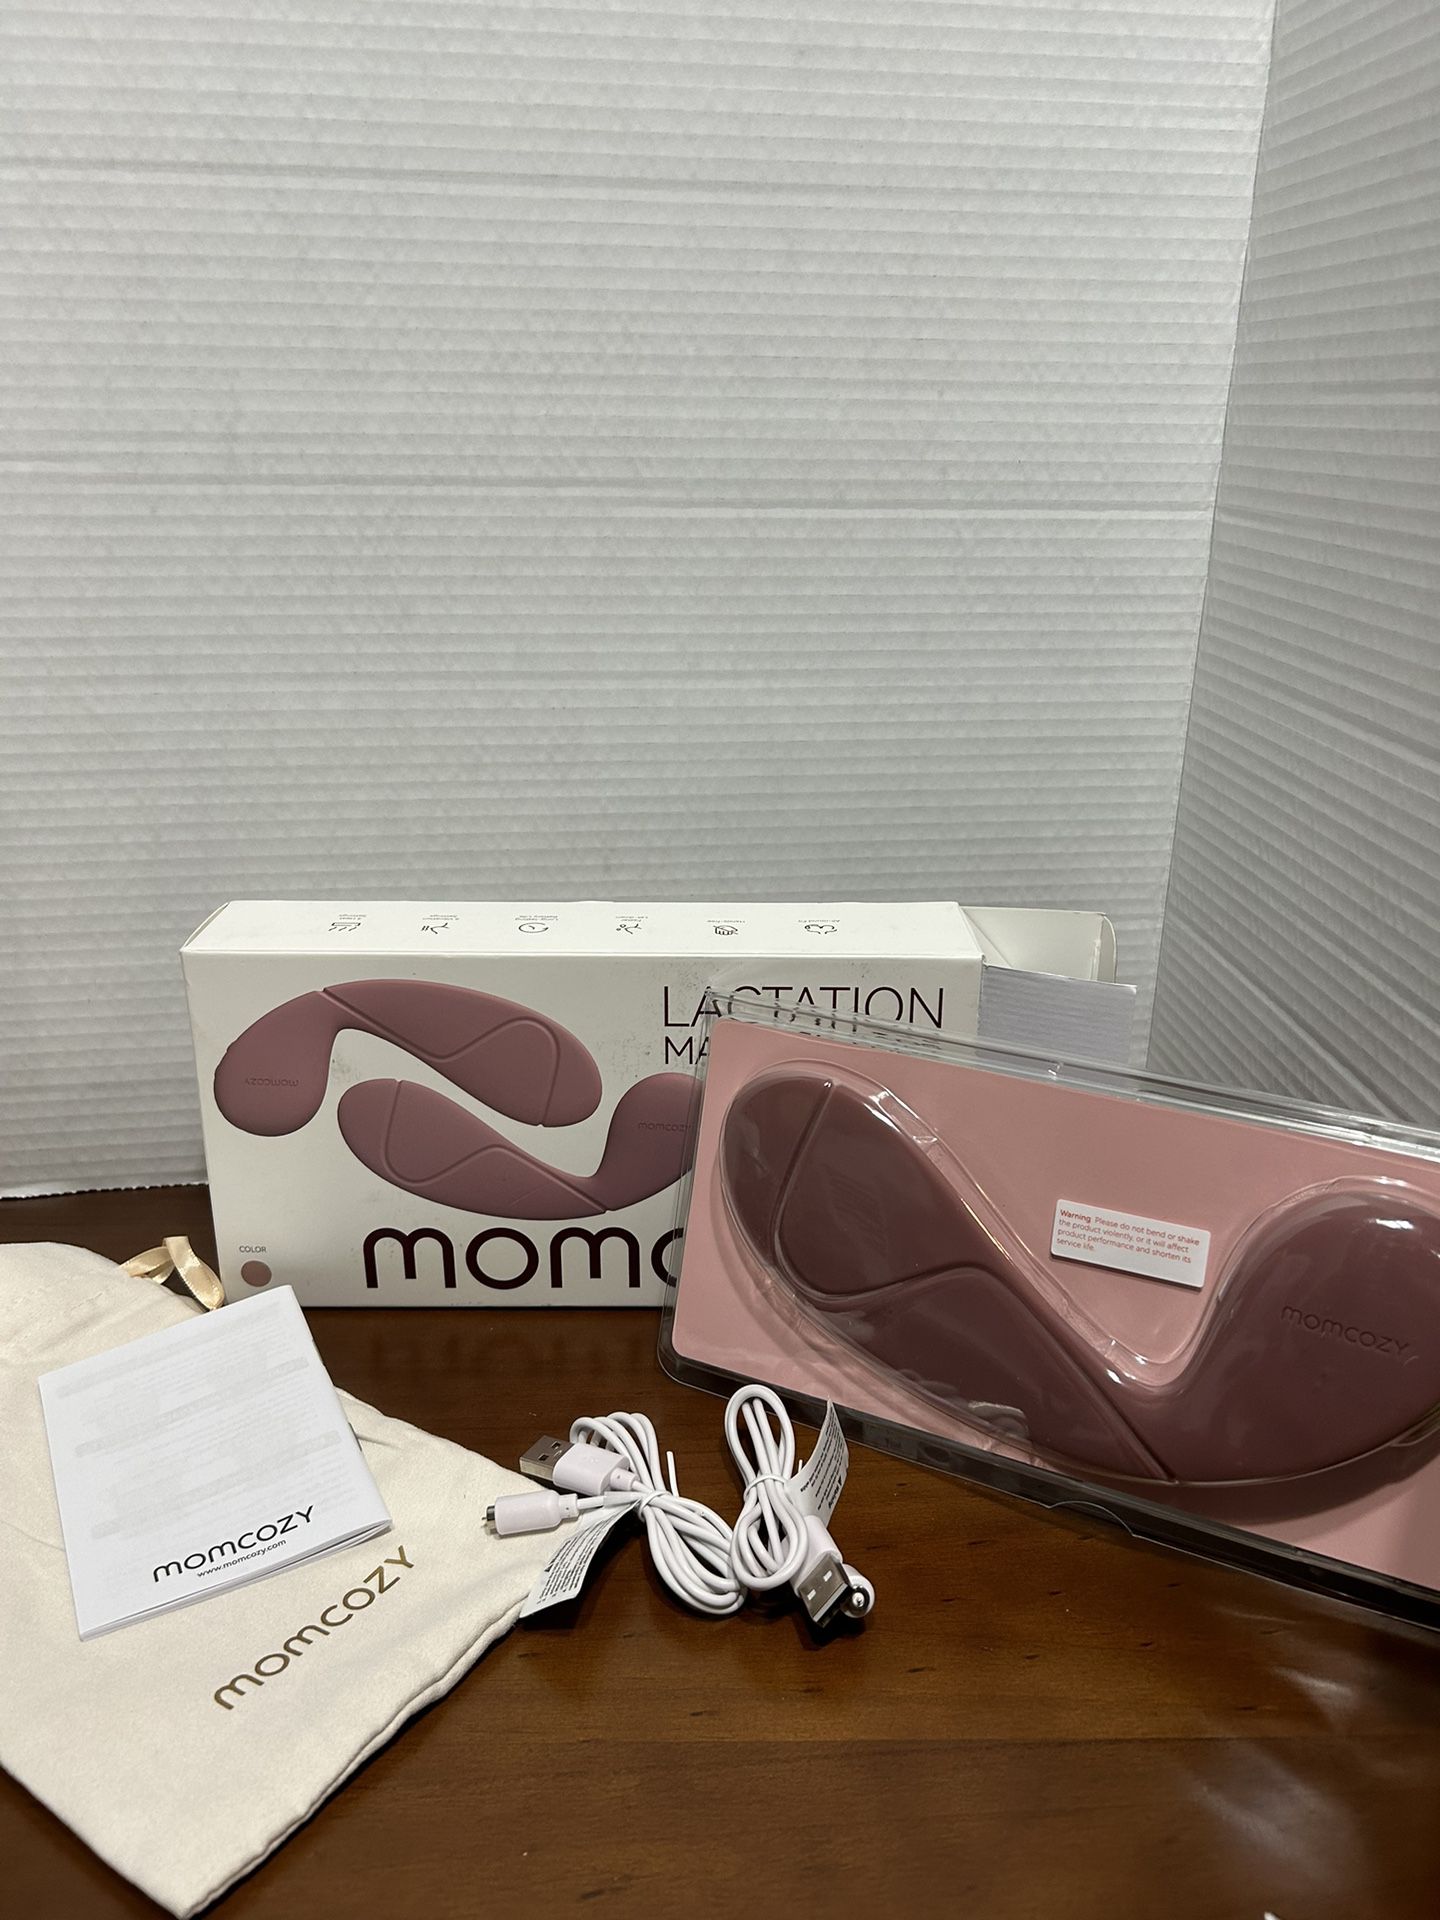 Momcozy Hands Free Lactation Massage Pads, LIKE NEW in Open Box!